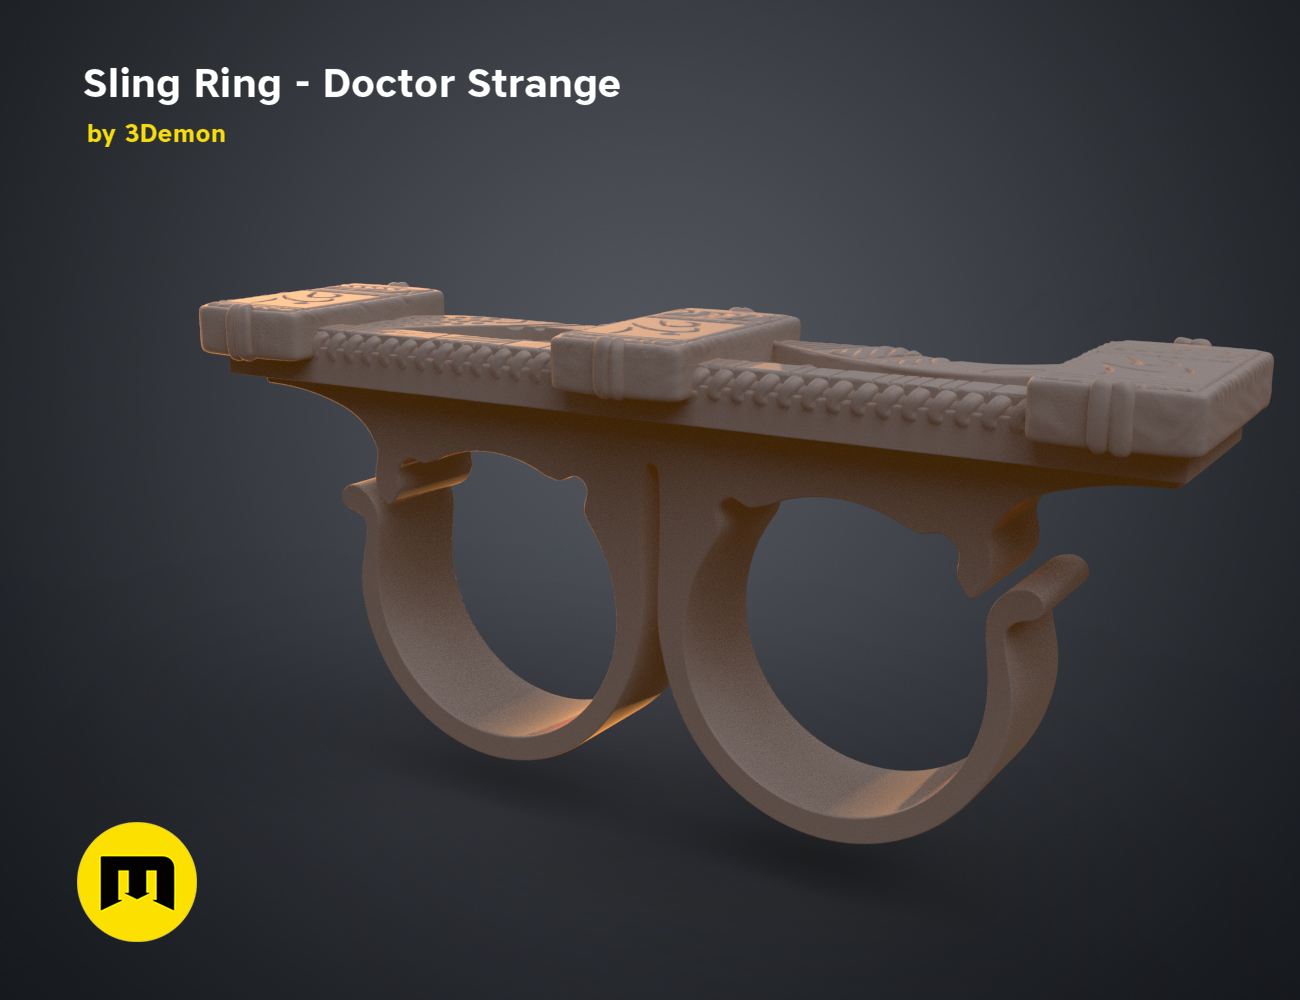 Amazon.com: HUAWELL KIllerbody Sling Ring Cosplay Accessories Sling Ring  Prop With Dr Strange necklace: Clothing, Shoes & Jewelry